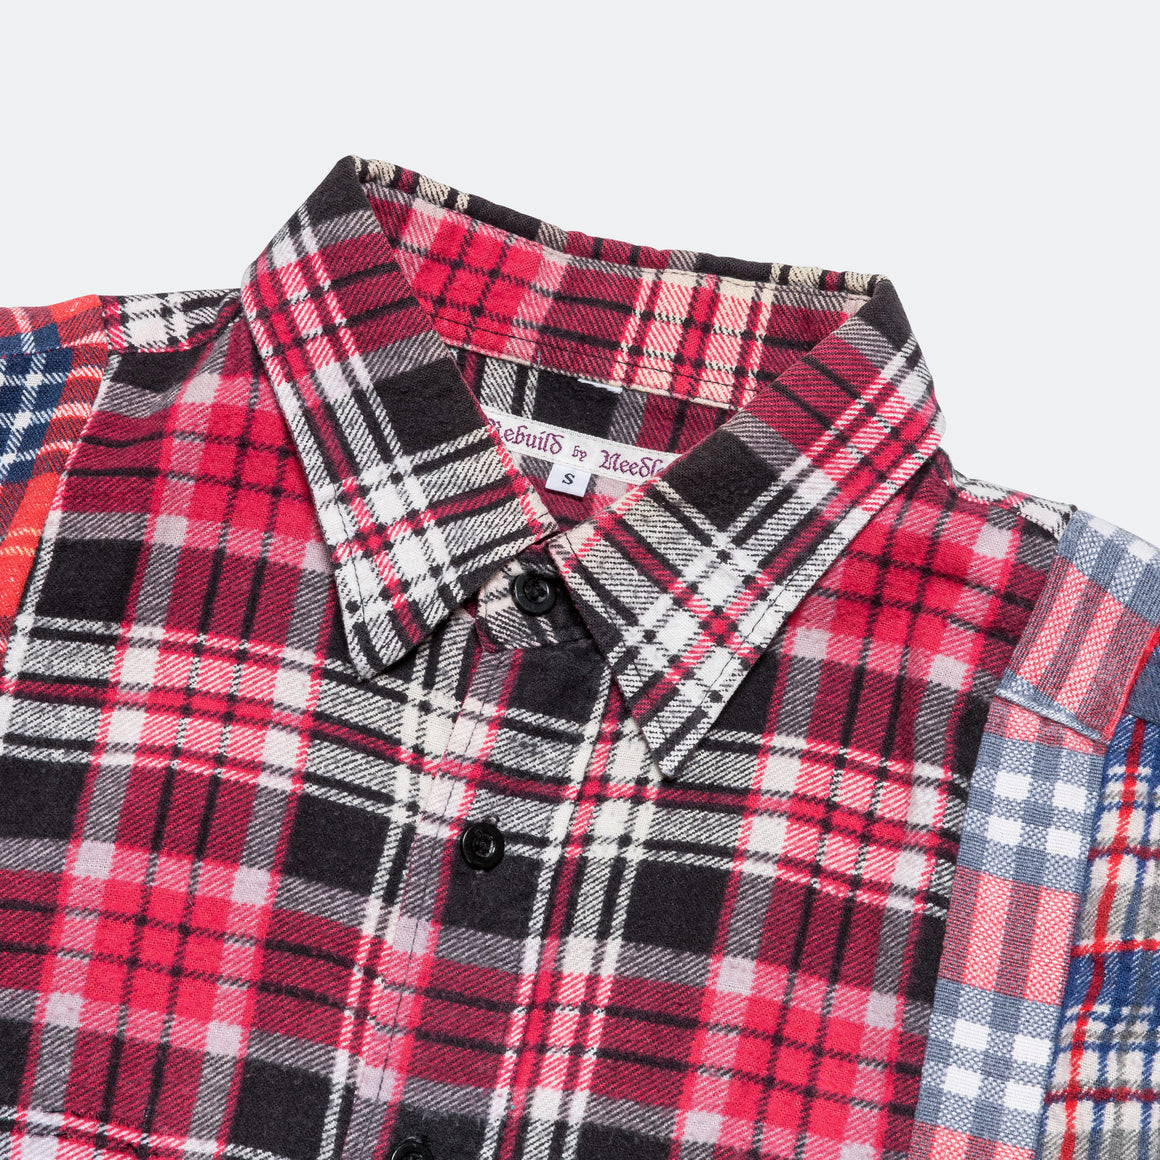 Needles - Rebuild Flannel 7 Cuts Shirt - Small #1 - UP THERE